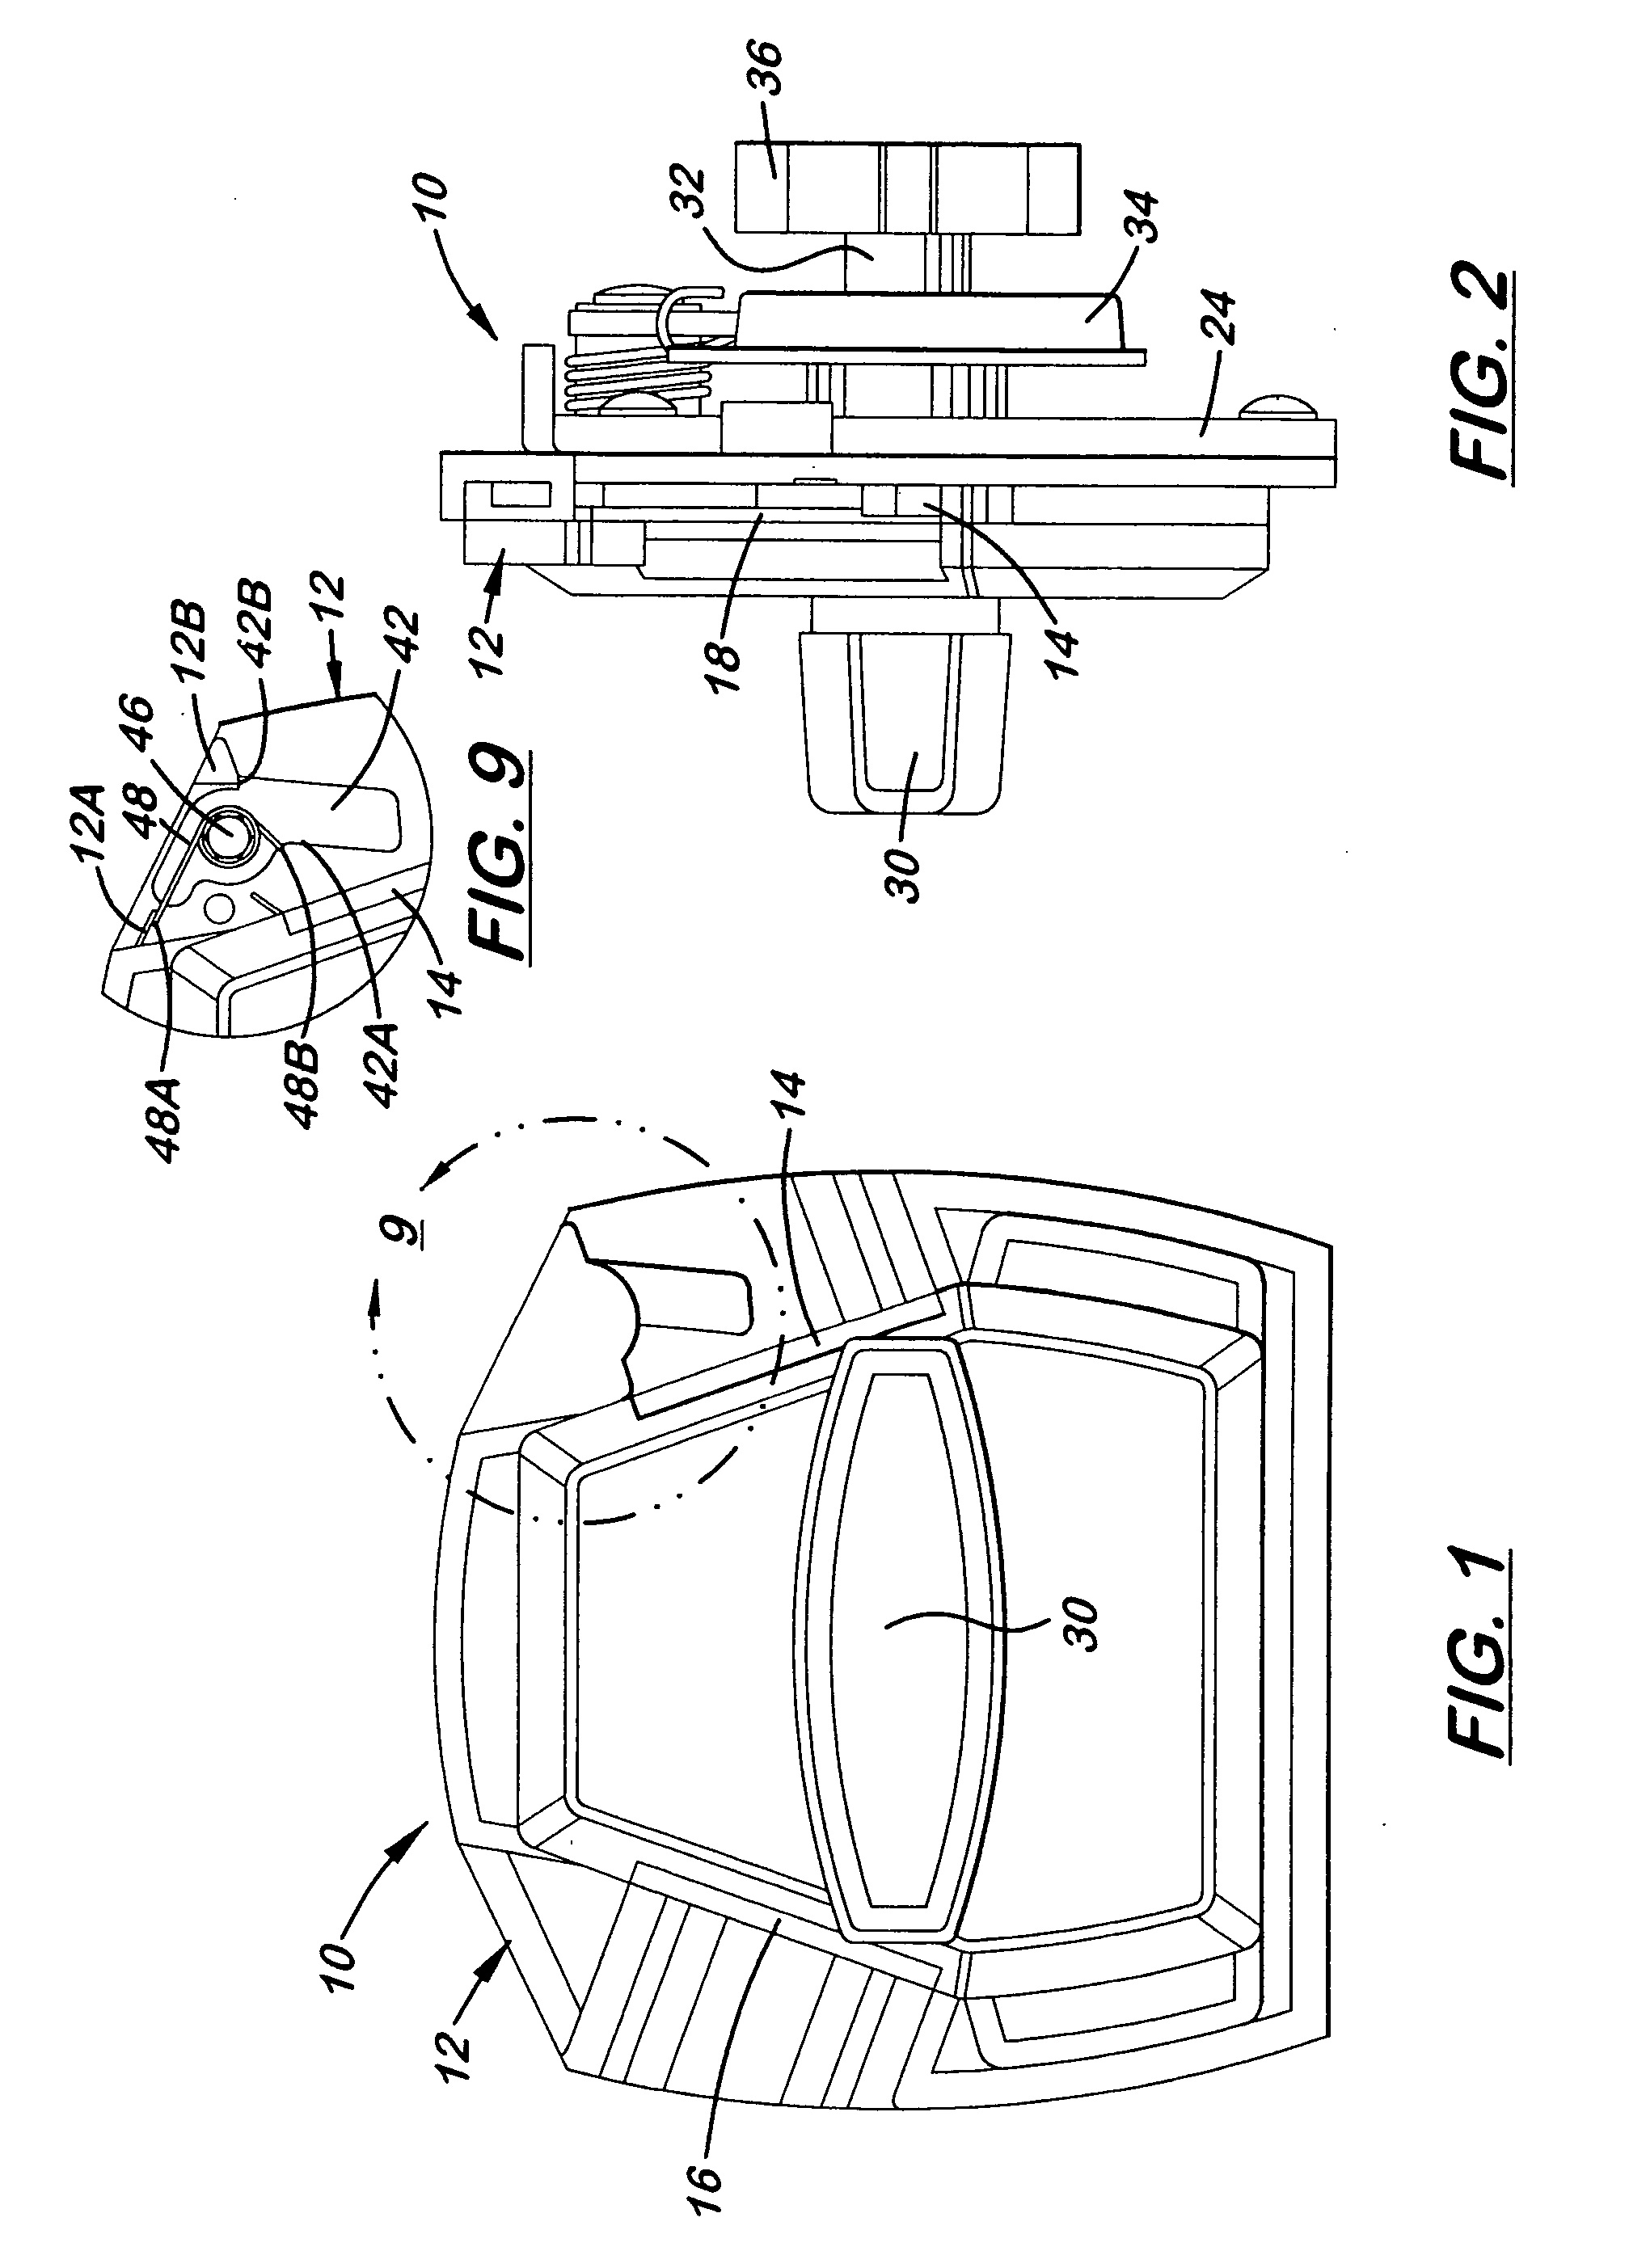 Multiple coin actuation mechanism